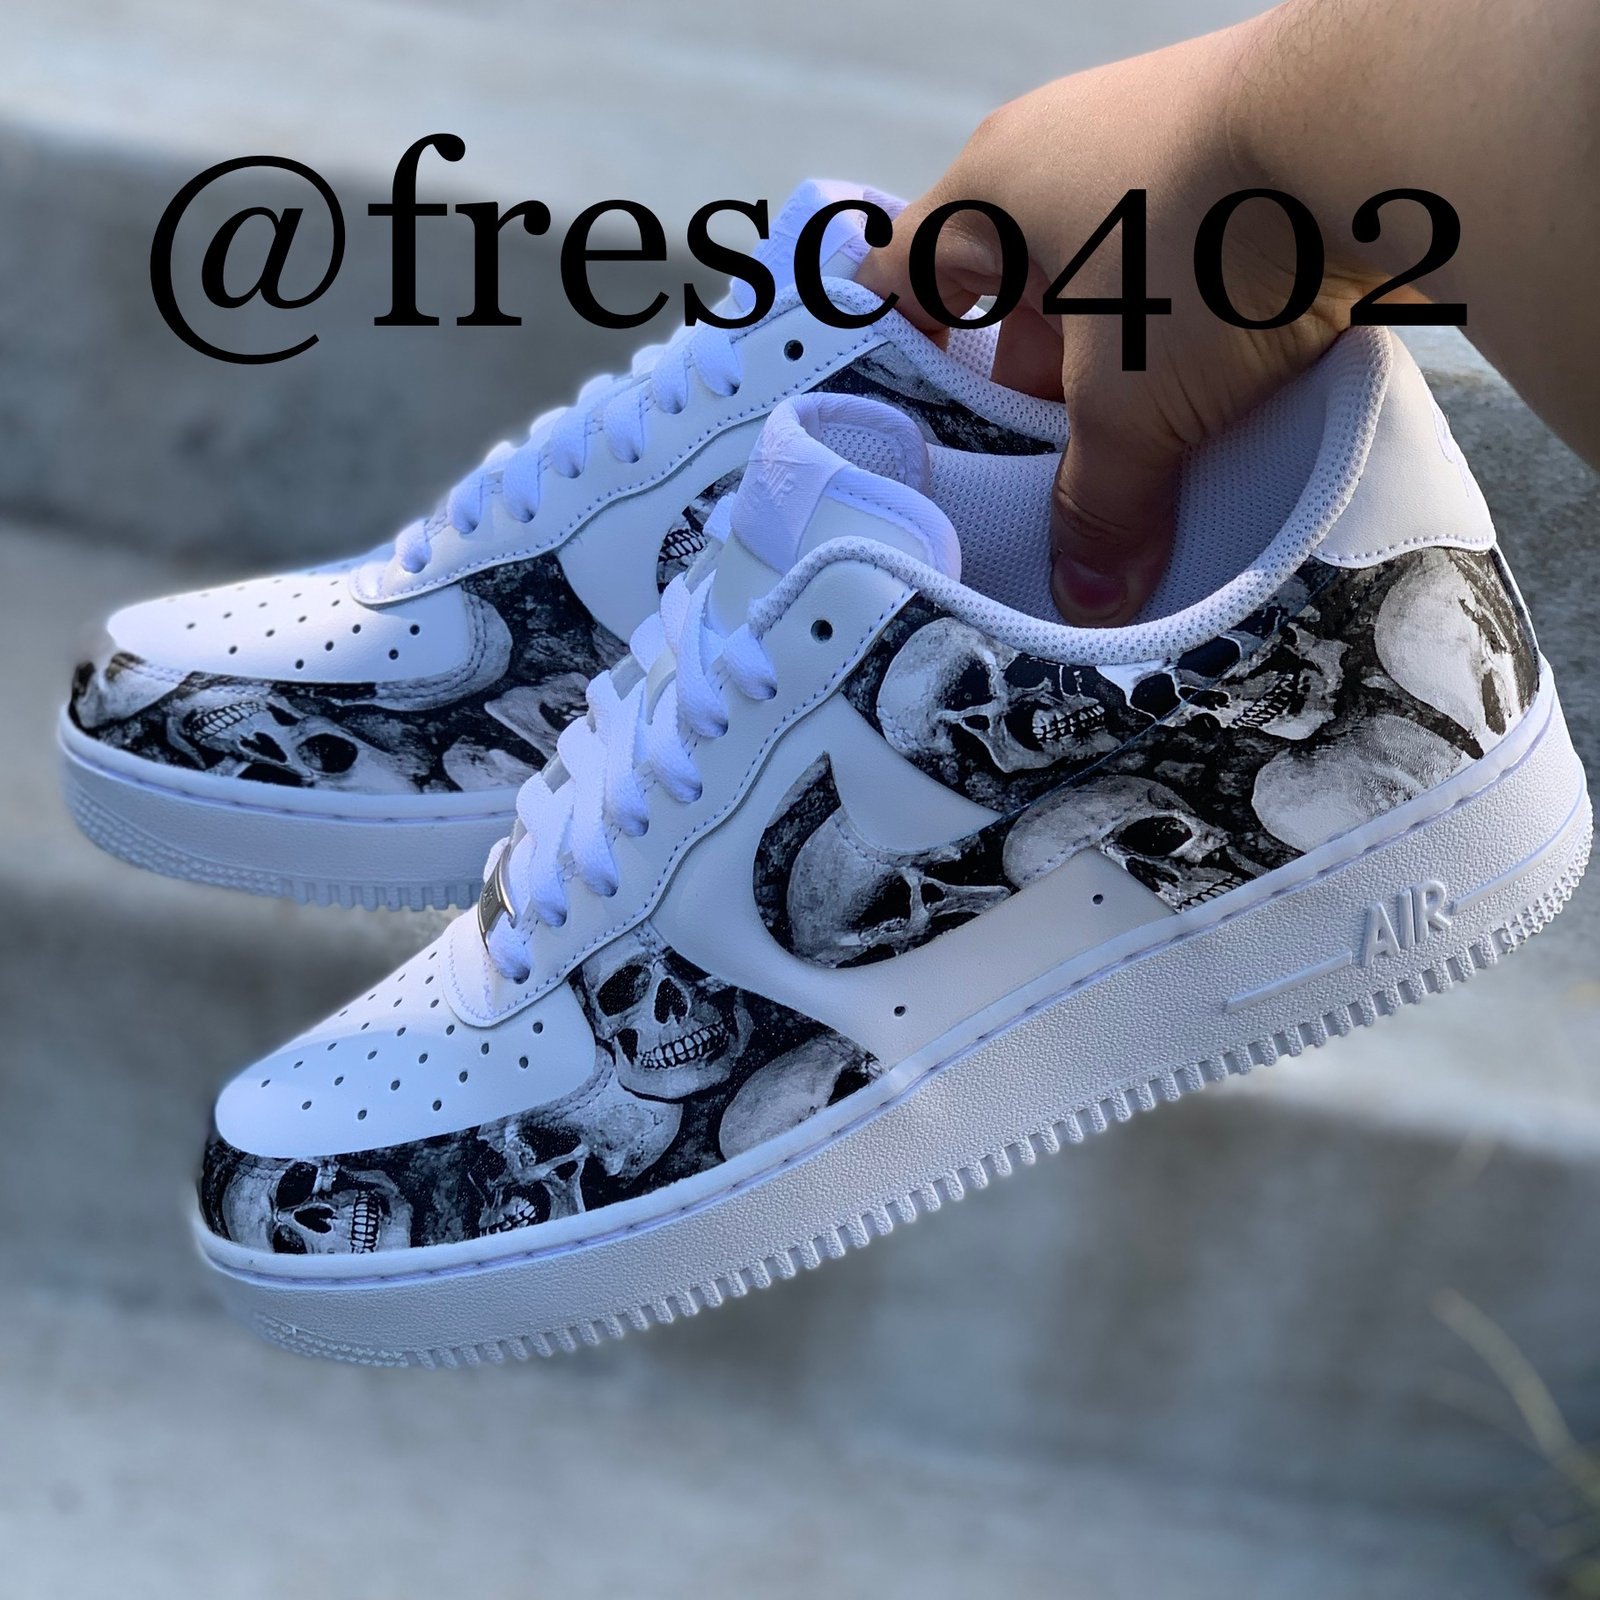 hydro dipped forces